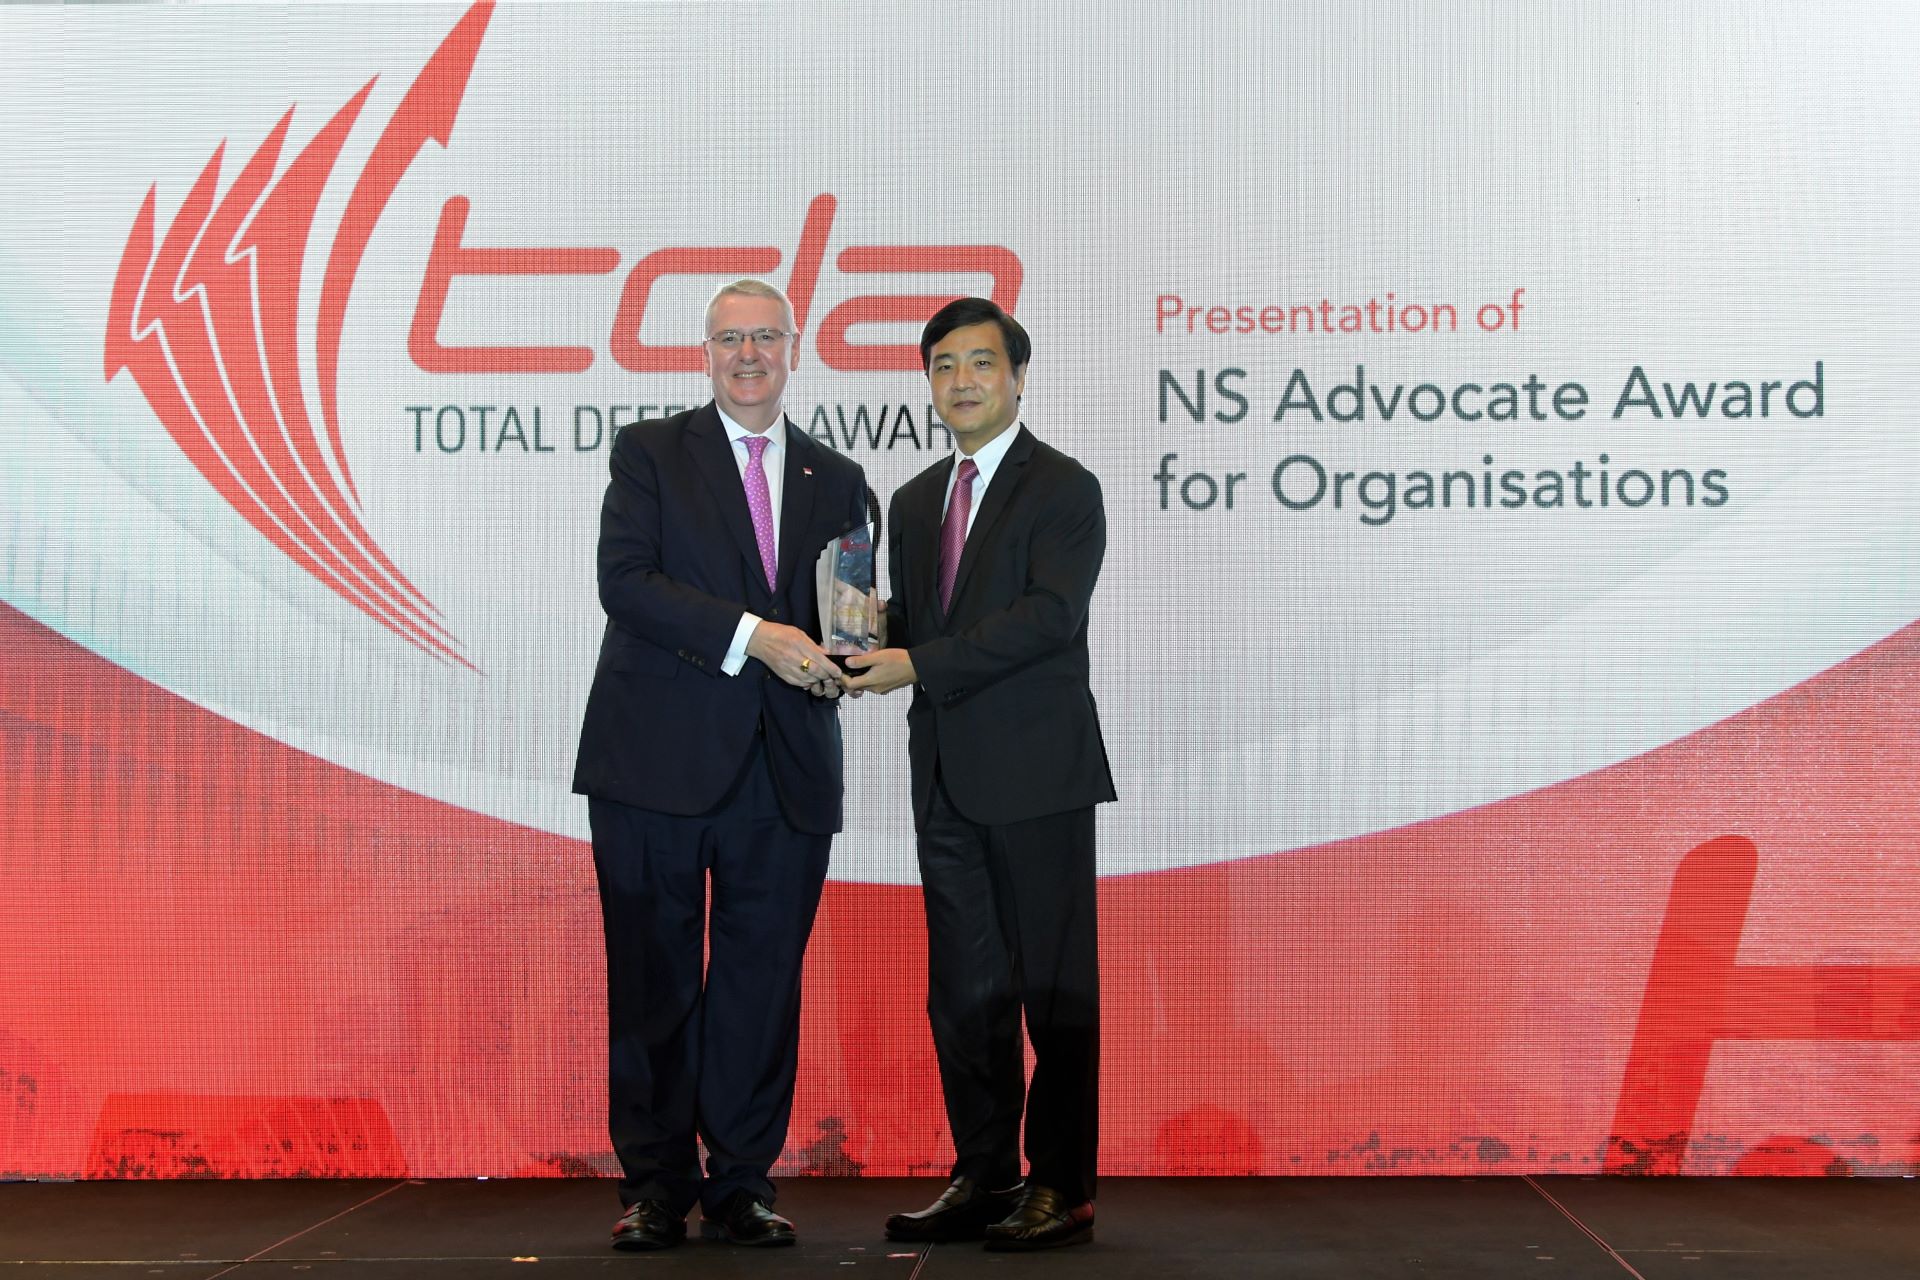 Mr Heng (right) presenting the NS Advocate Award for Organisations to Mr Victor Mills from the Singapore International Chamber of Commerce at the TDA Dinner 2019.